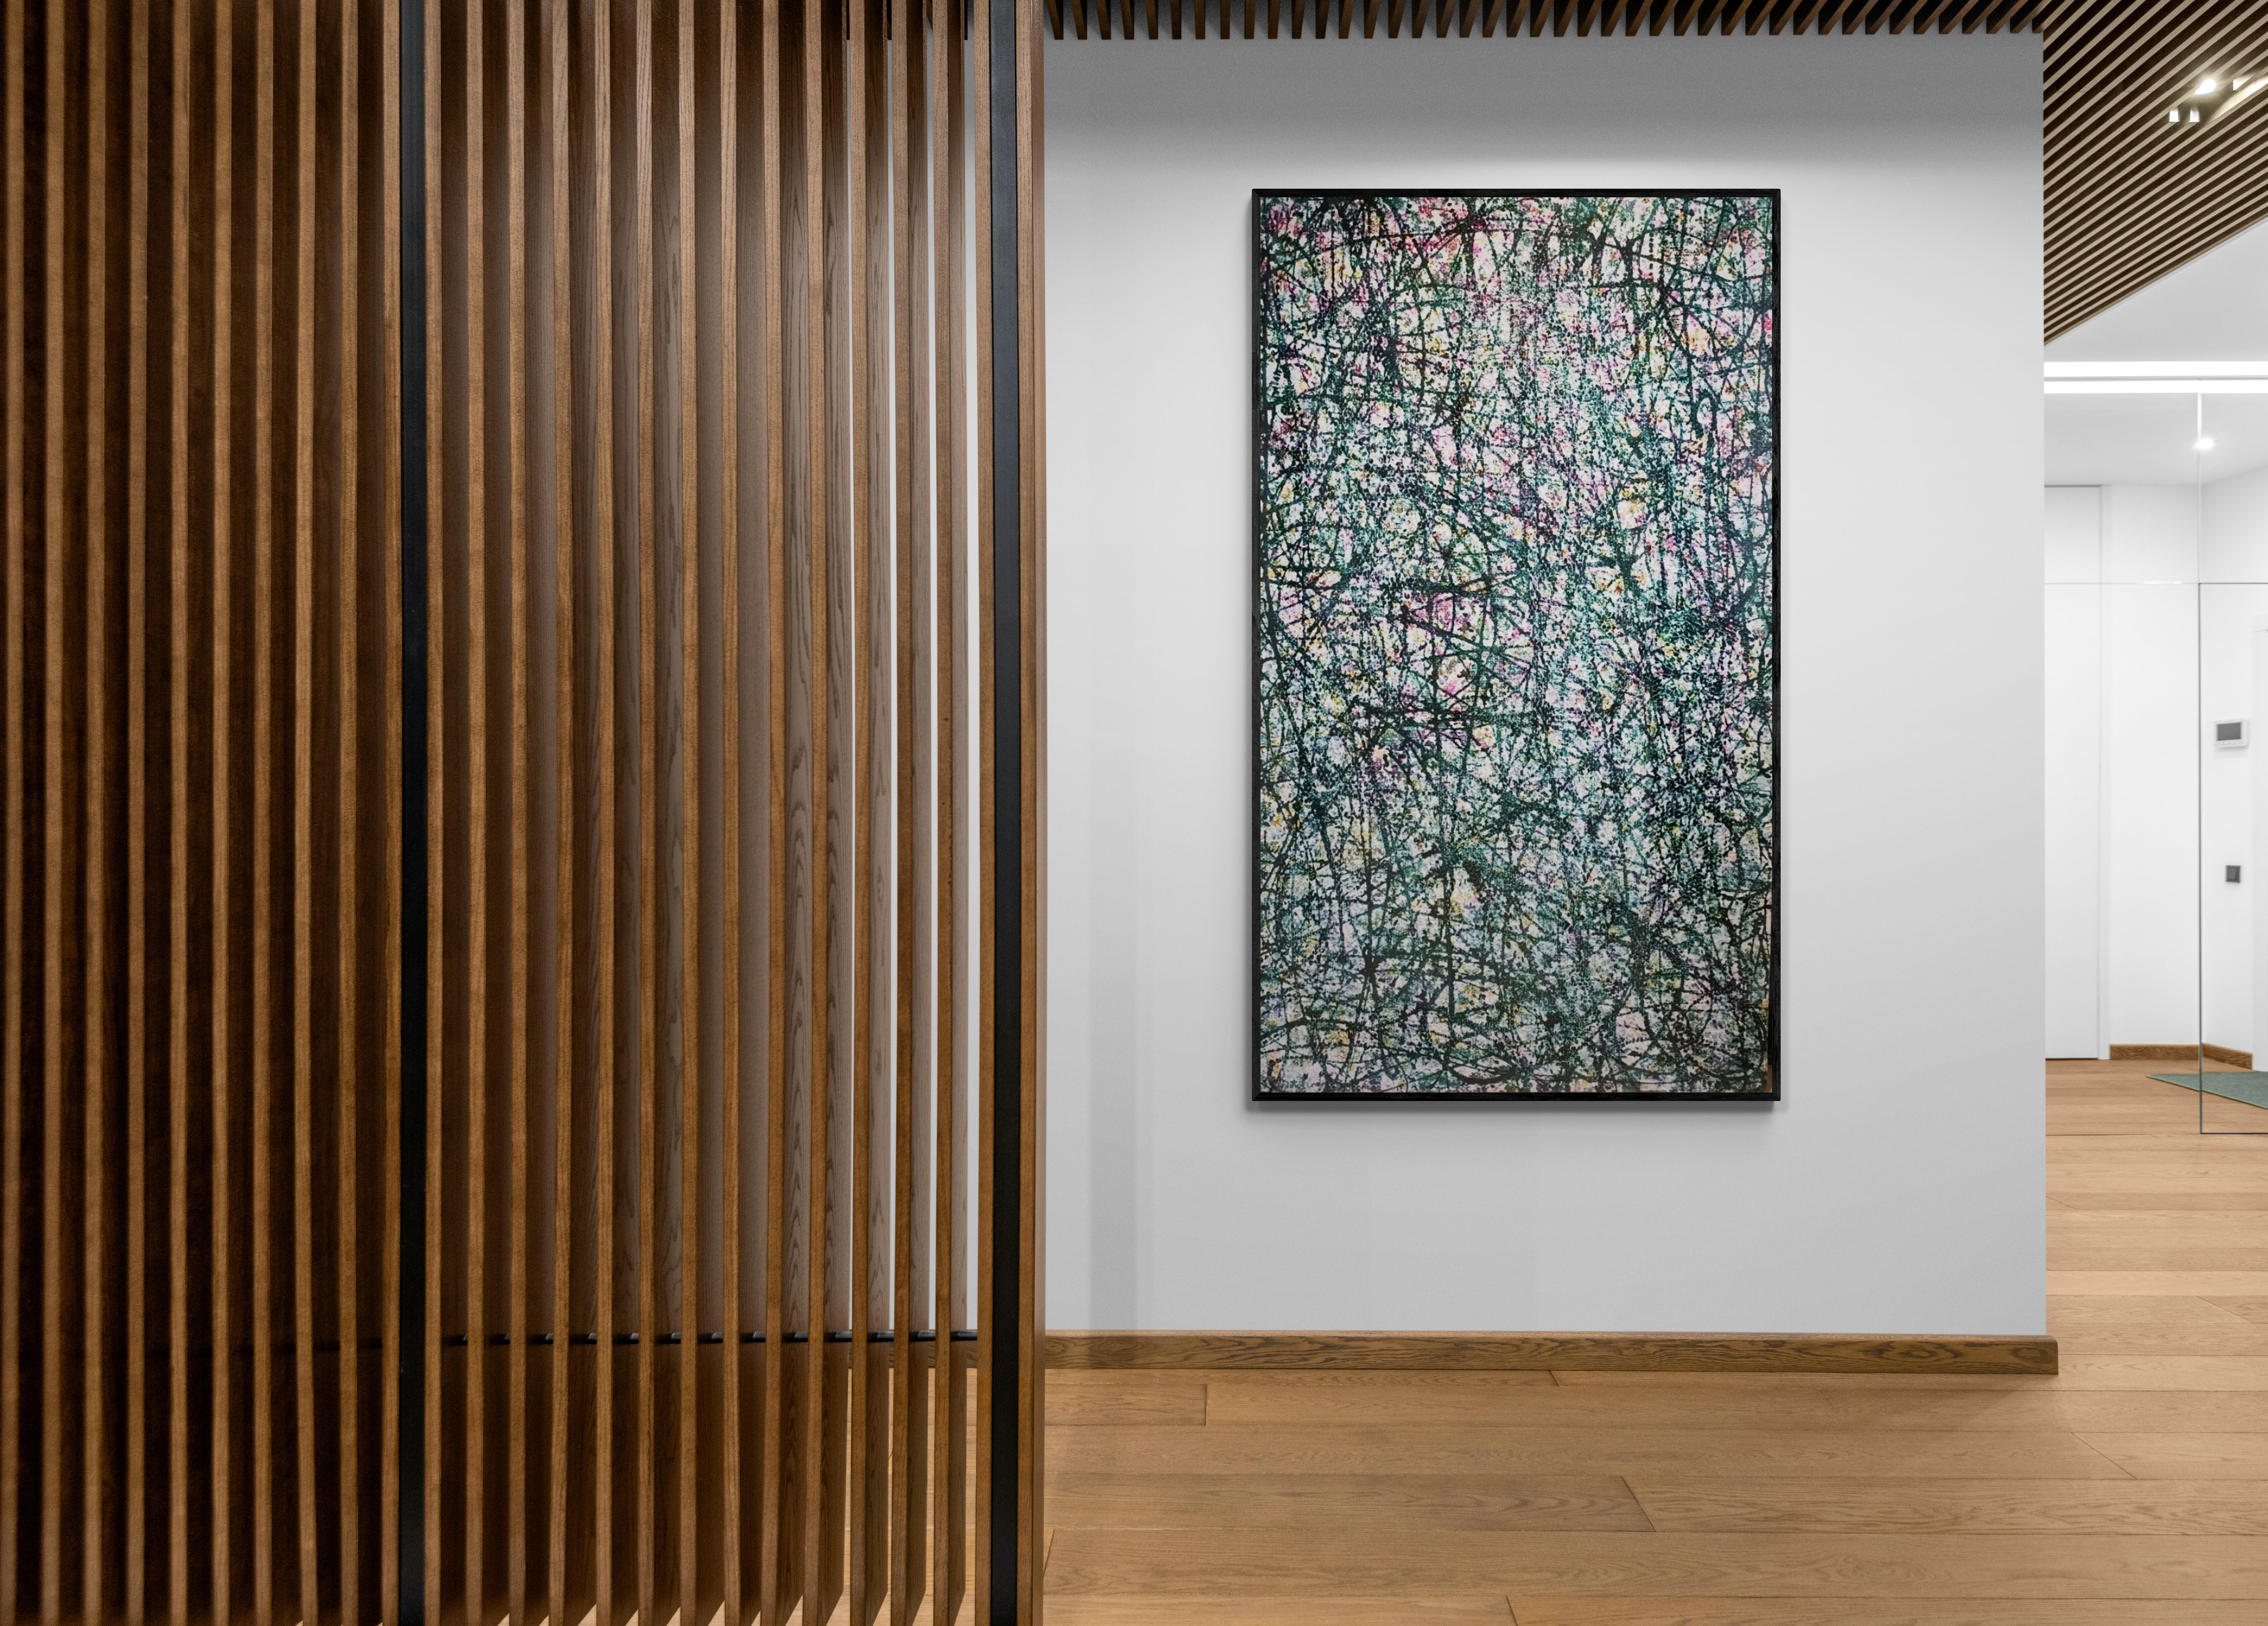 Very beautiful contemporary painting, abstract in the style of Jackson Pollock and Larry Poons.
.
Unsigned, unidentified.
.
Superb colors and beautiful materials that are not necessarily seen in the images.
.
Painting on wood  which gives a sublime